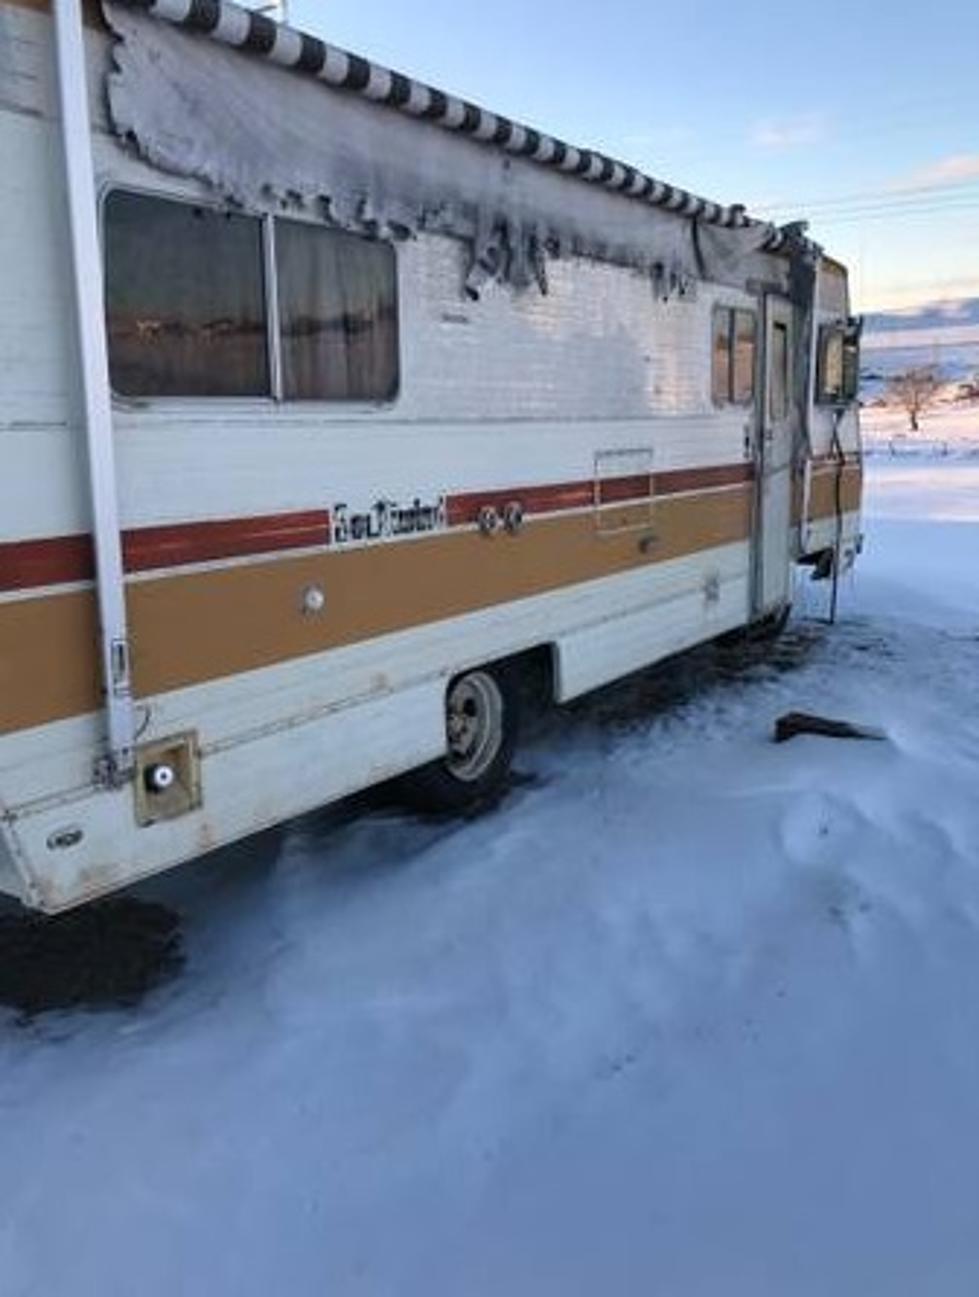 There’s a Free Motorhome in Wyoming Right Now on Craigslist